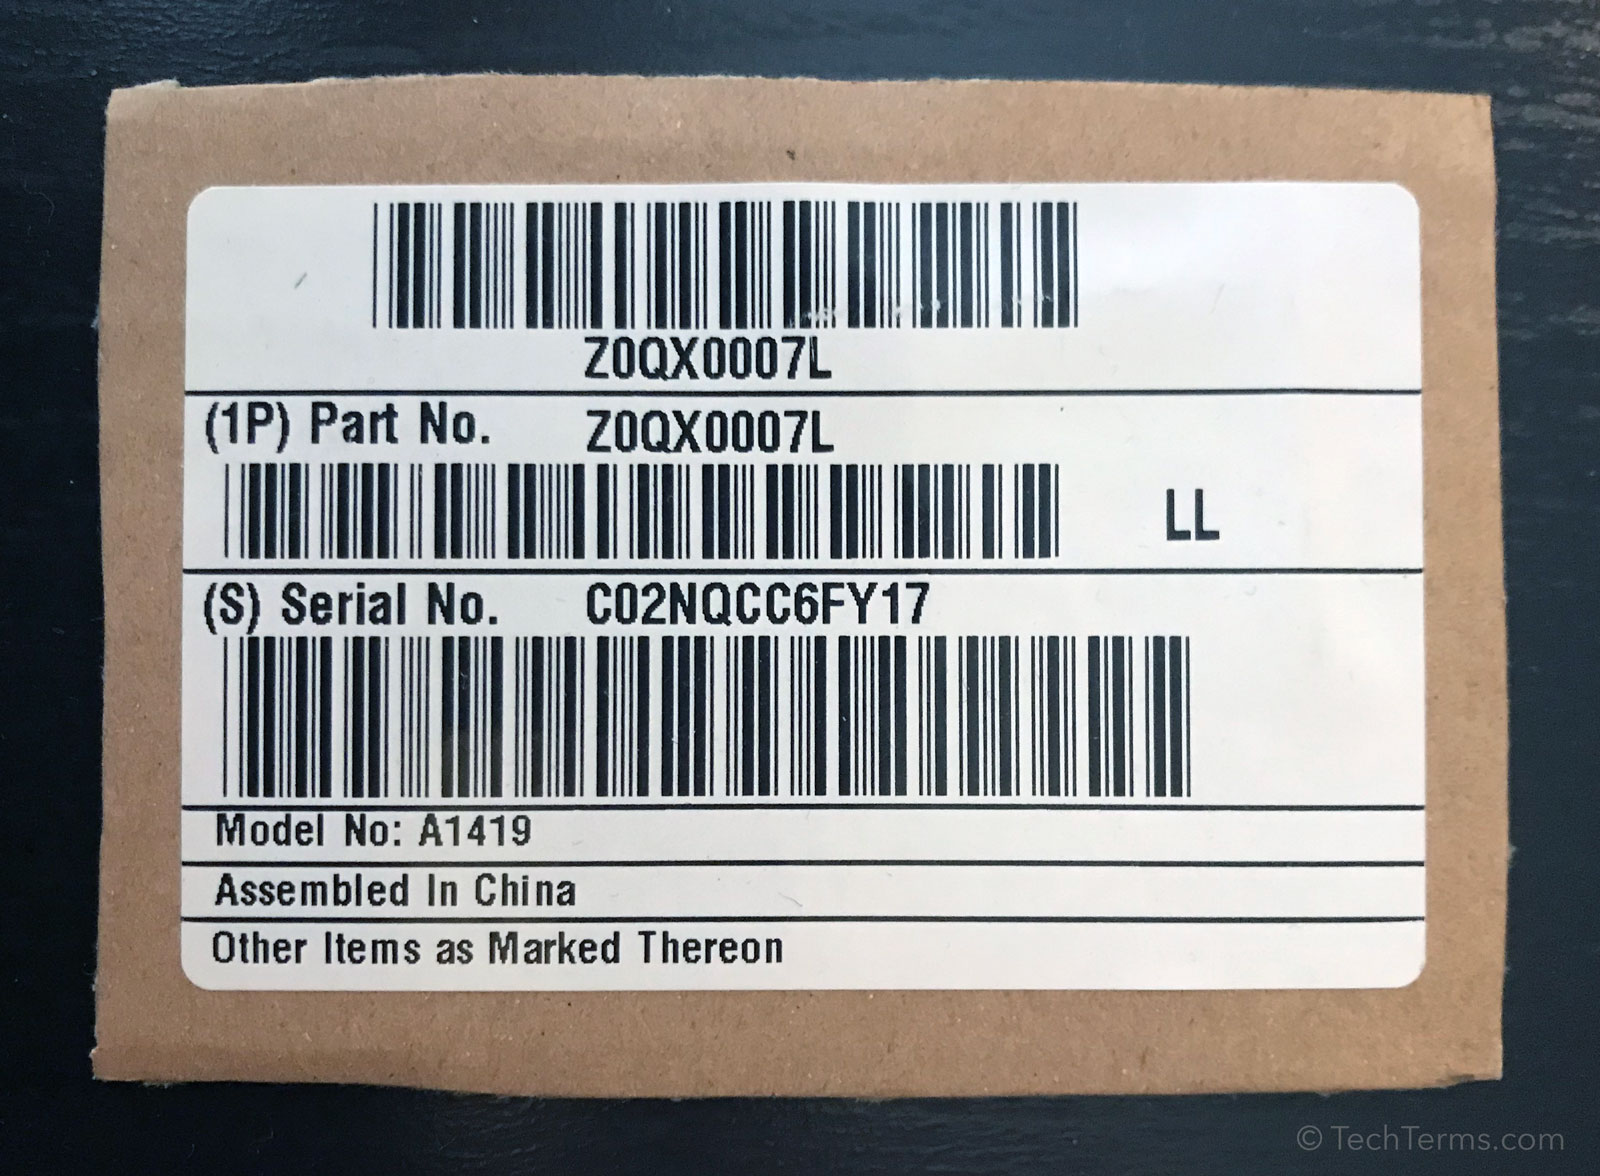 How to Find Your Product's Serial Number